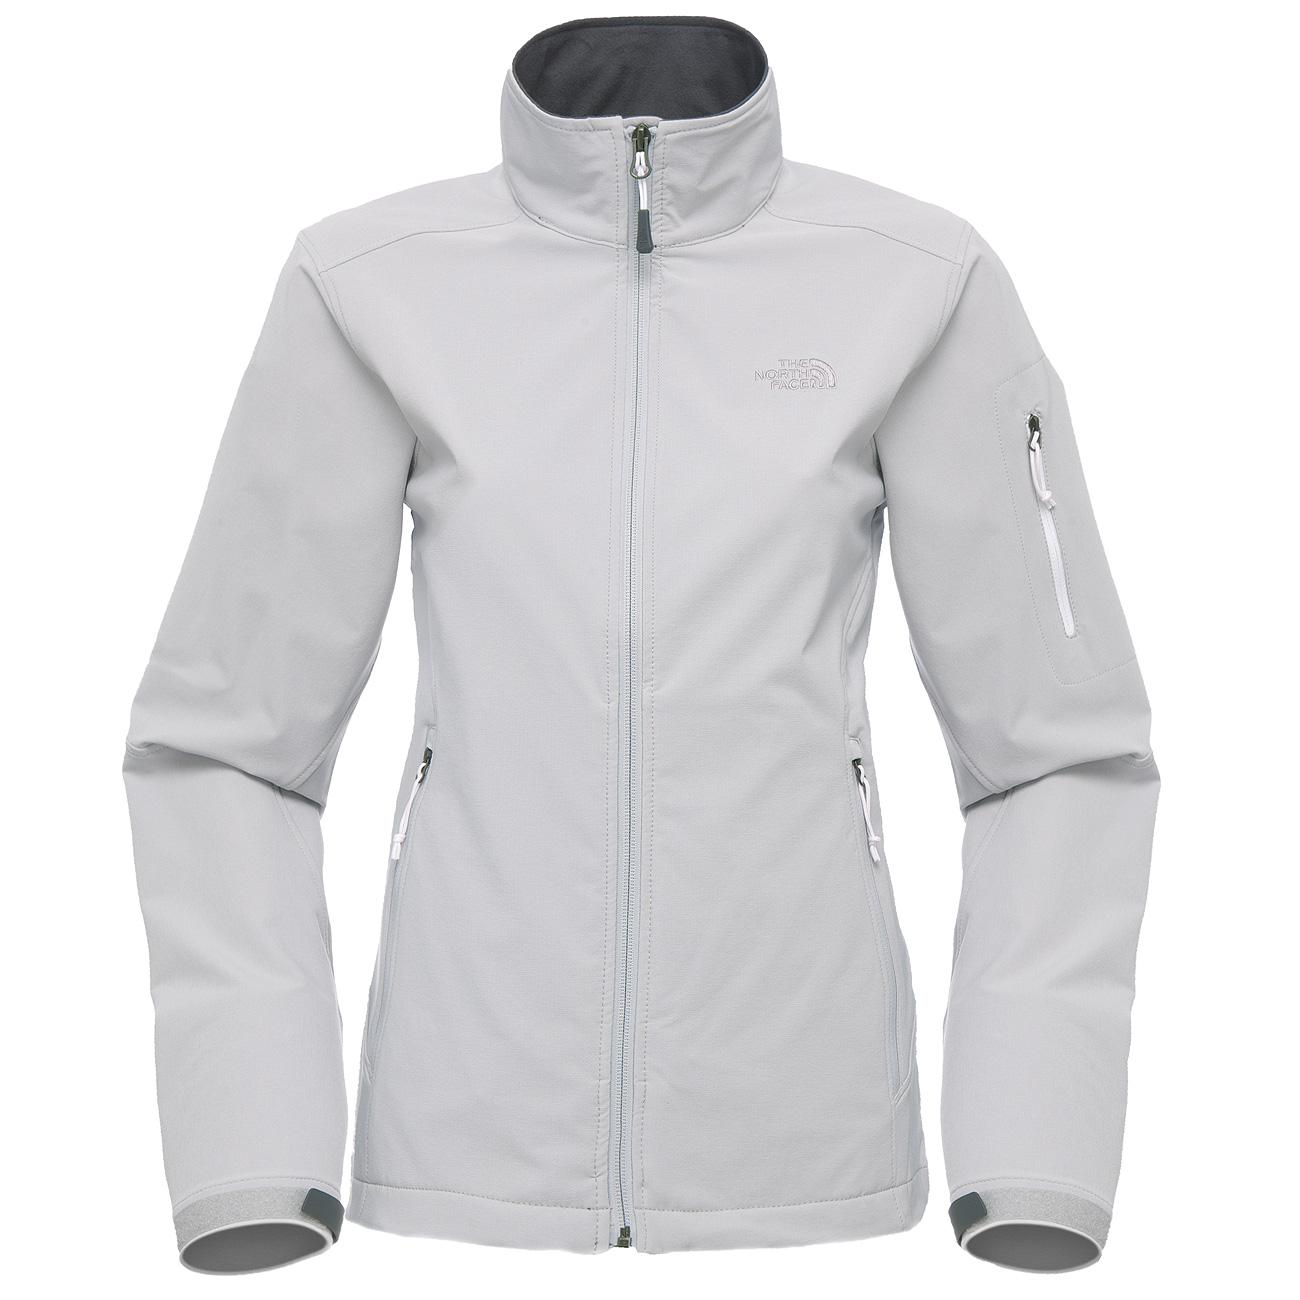 Foto Chaqueta Soft Shell The North Face Ceresio gris para mujer , xs